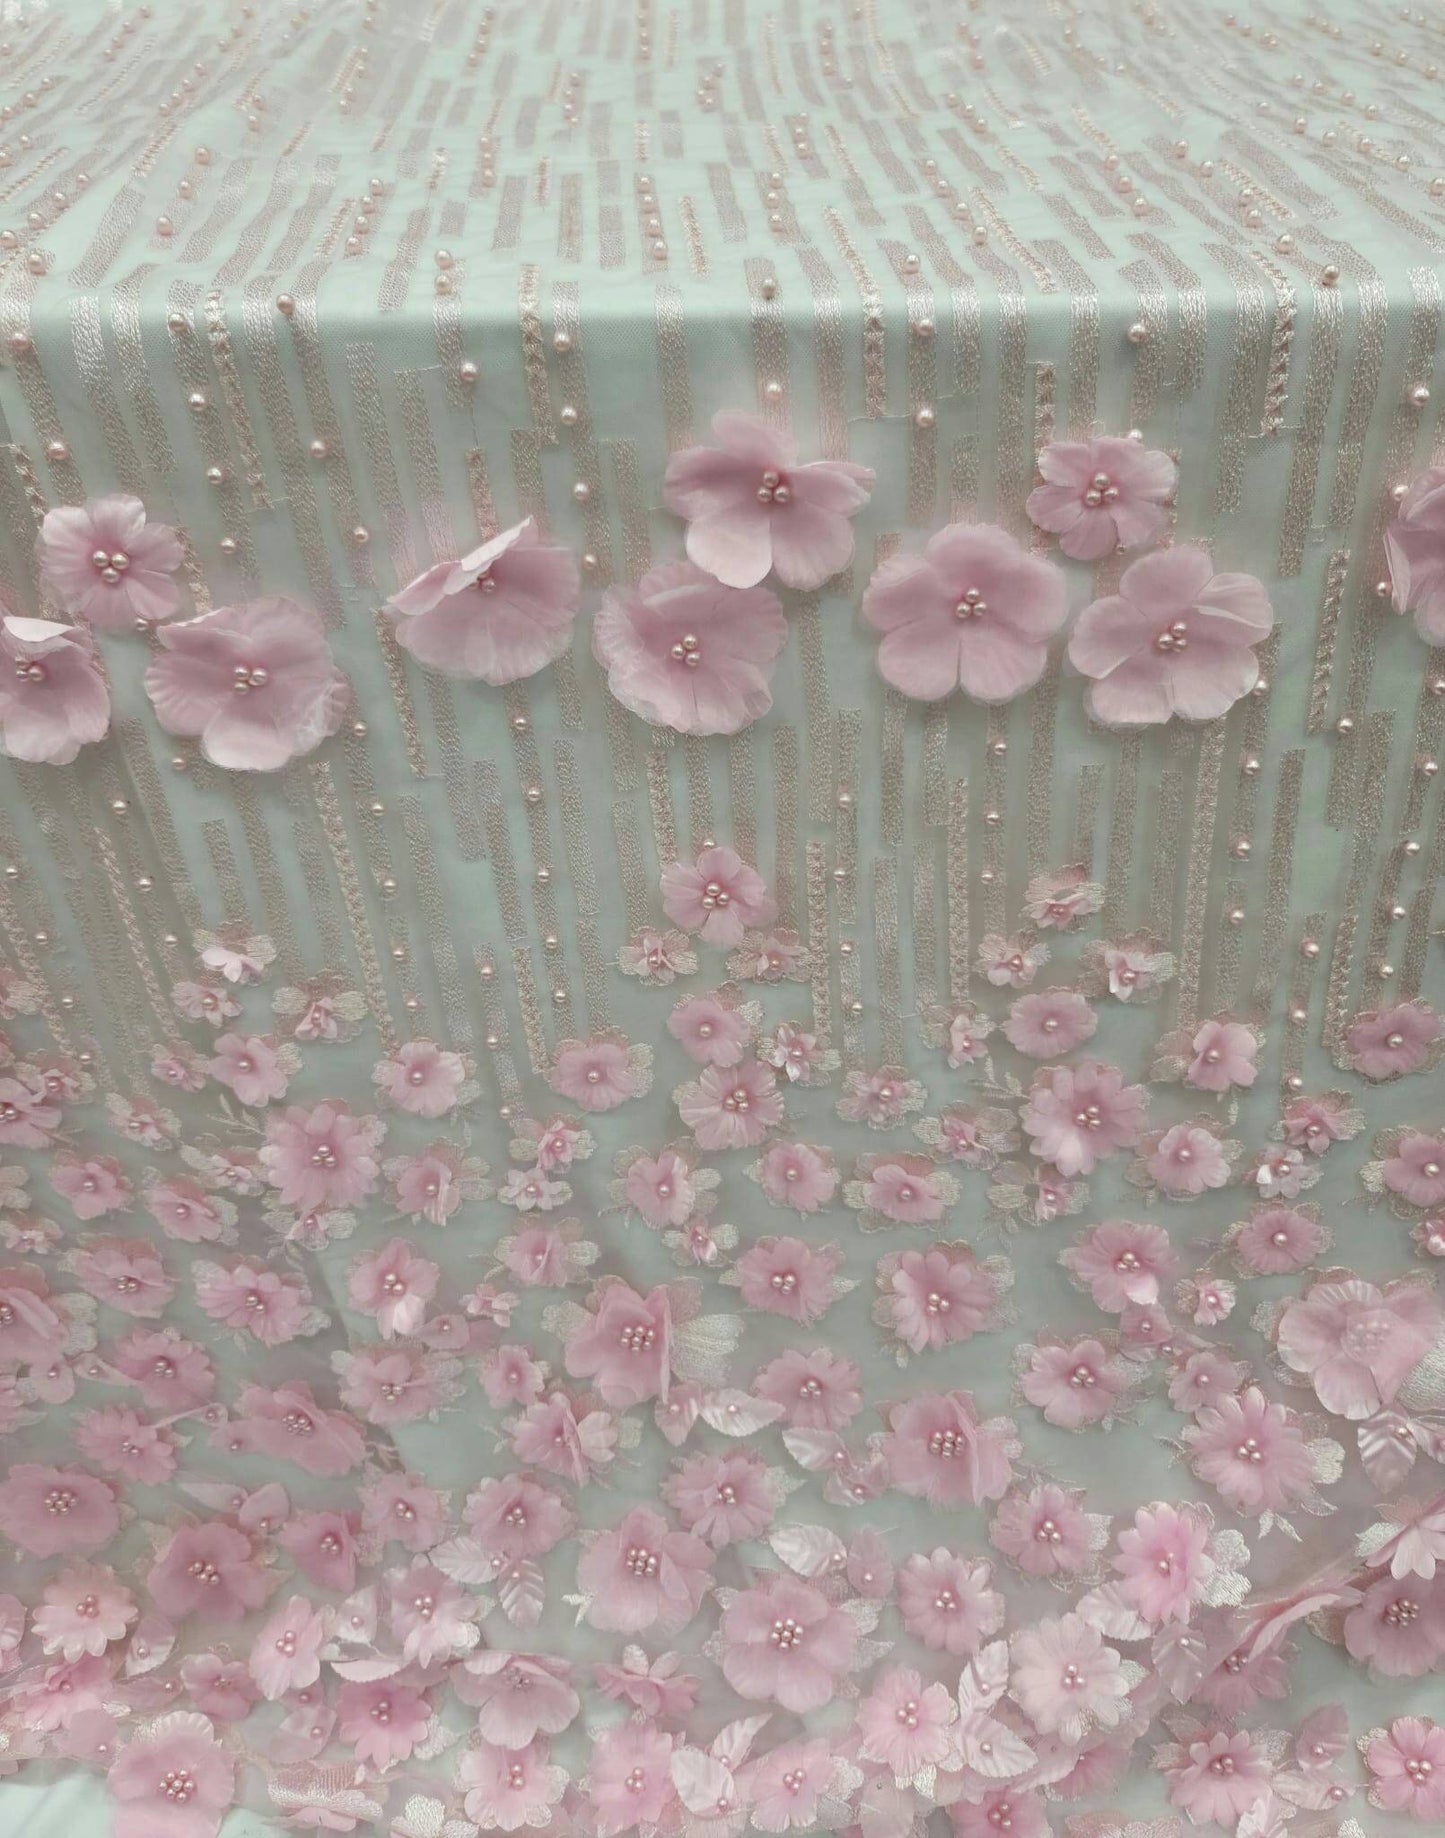 Pink Lace 3d Satin Floral Flowers On Embroidered Mesh Quinceañera Bridal Prom Gown Fabric Sold By The Yard Wedding Pearls